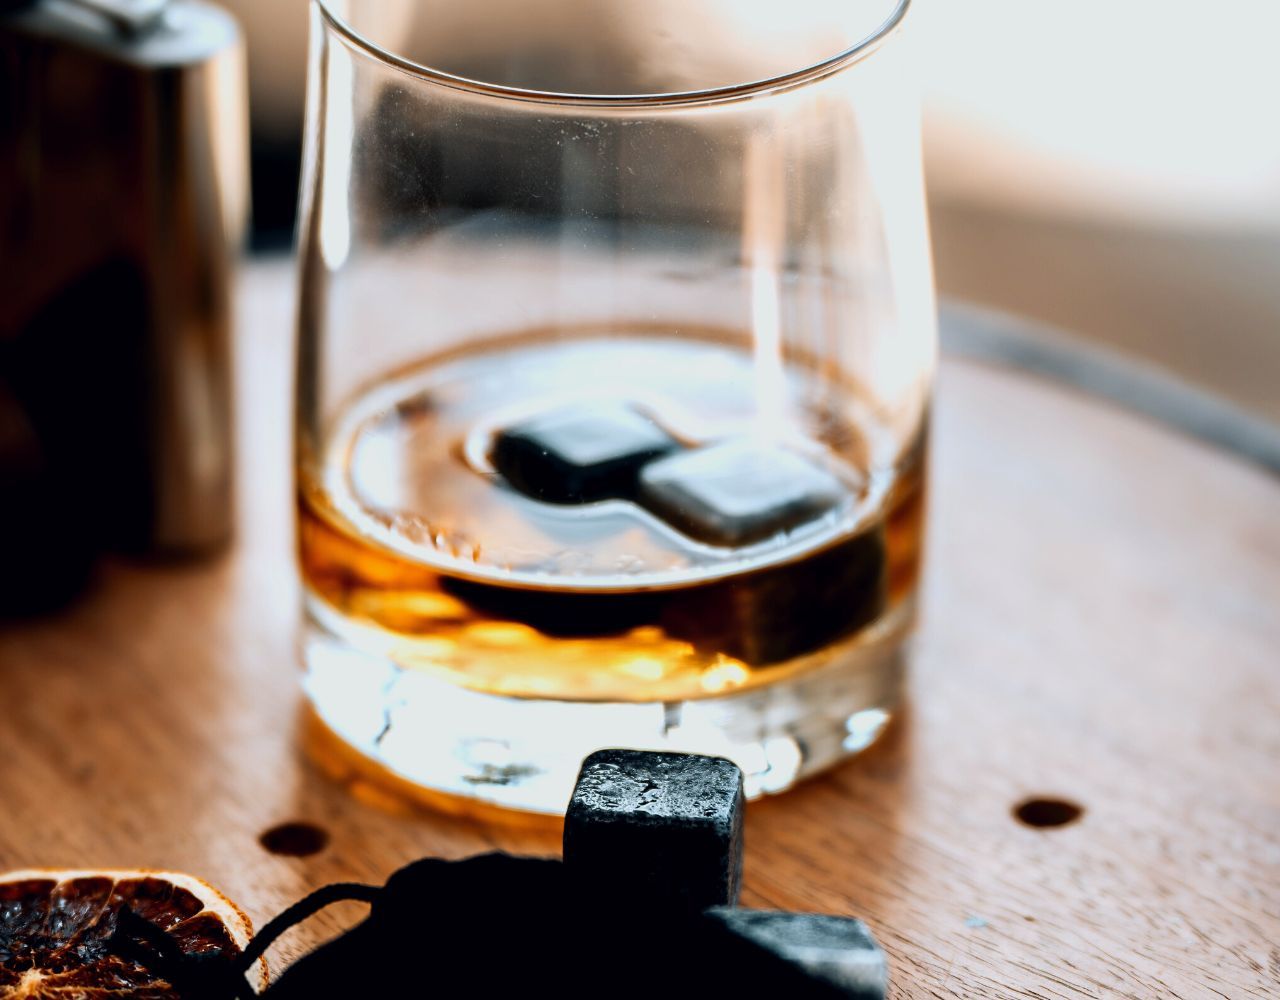 Image of diy distilling the best whiskey stones